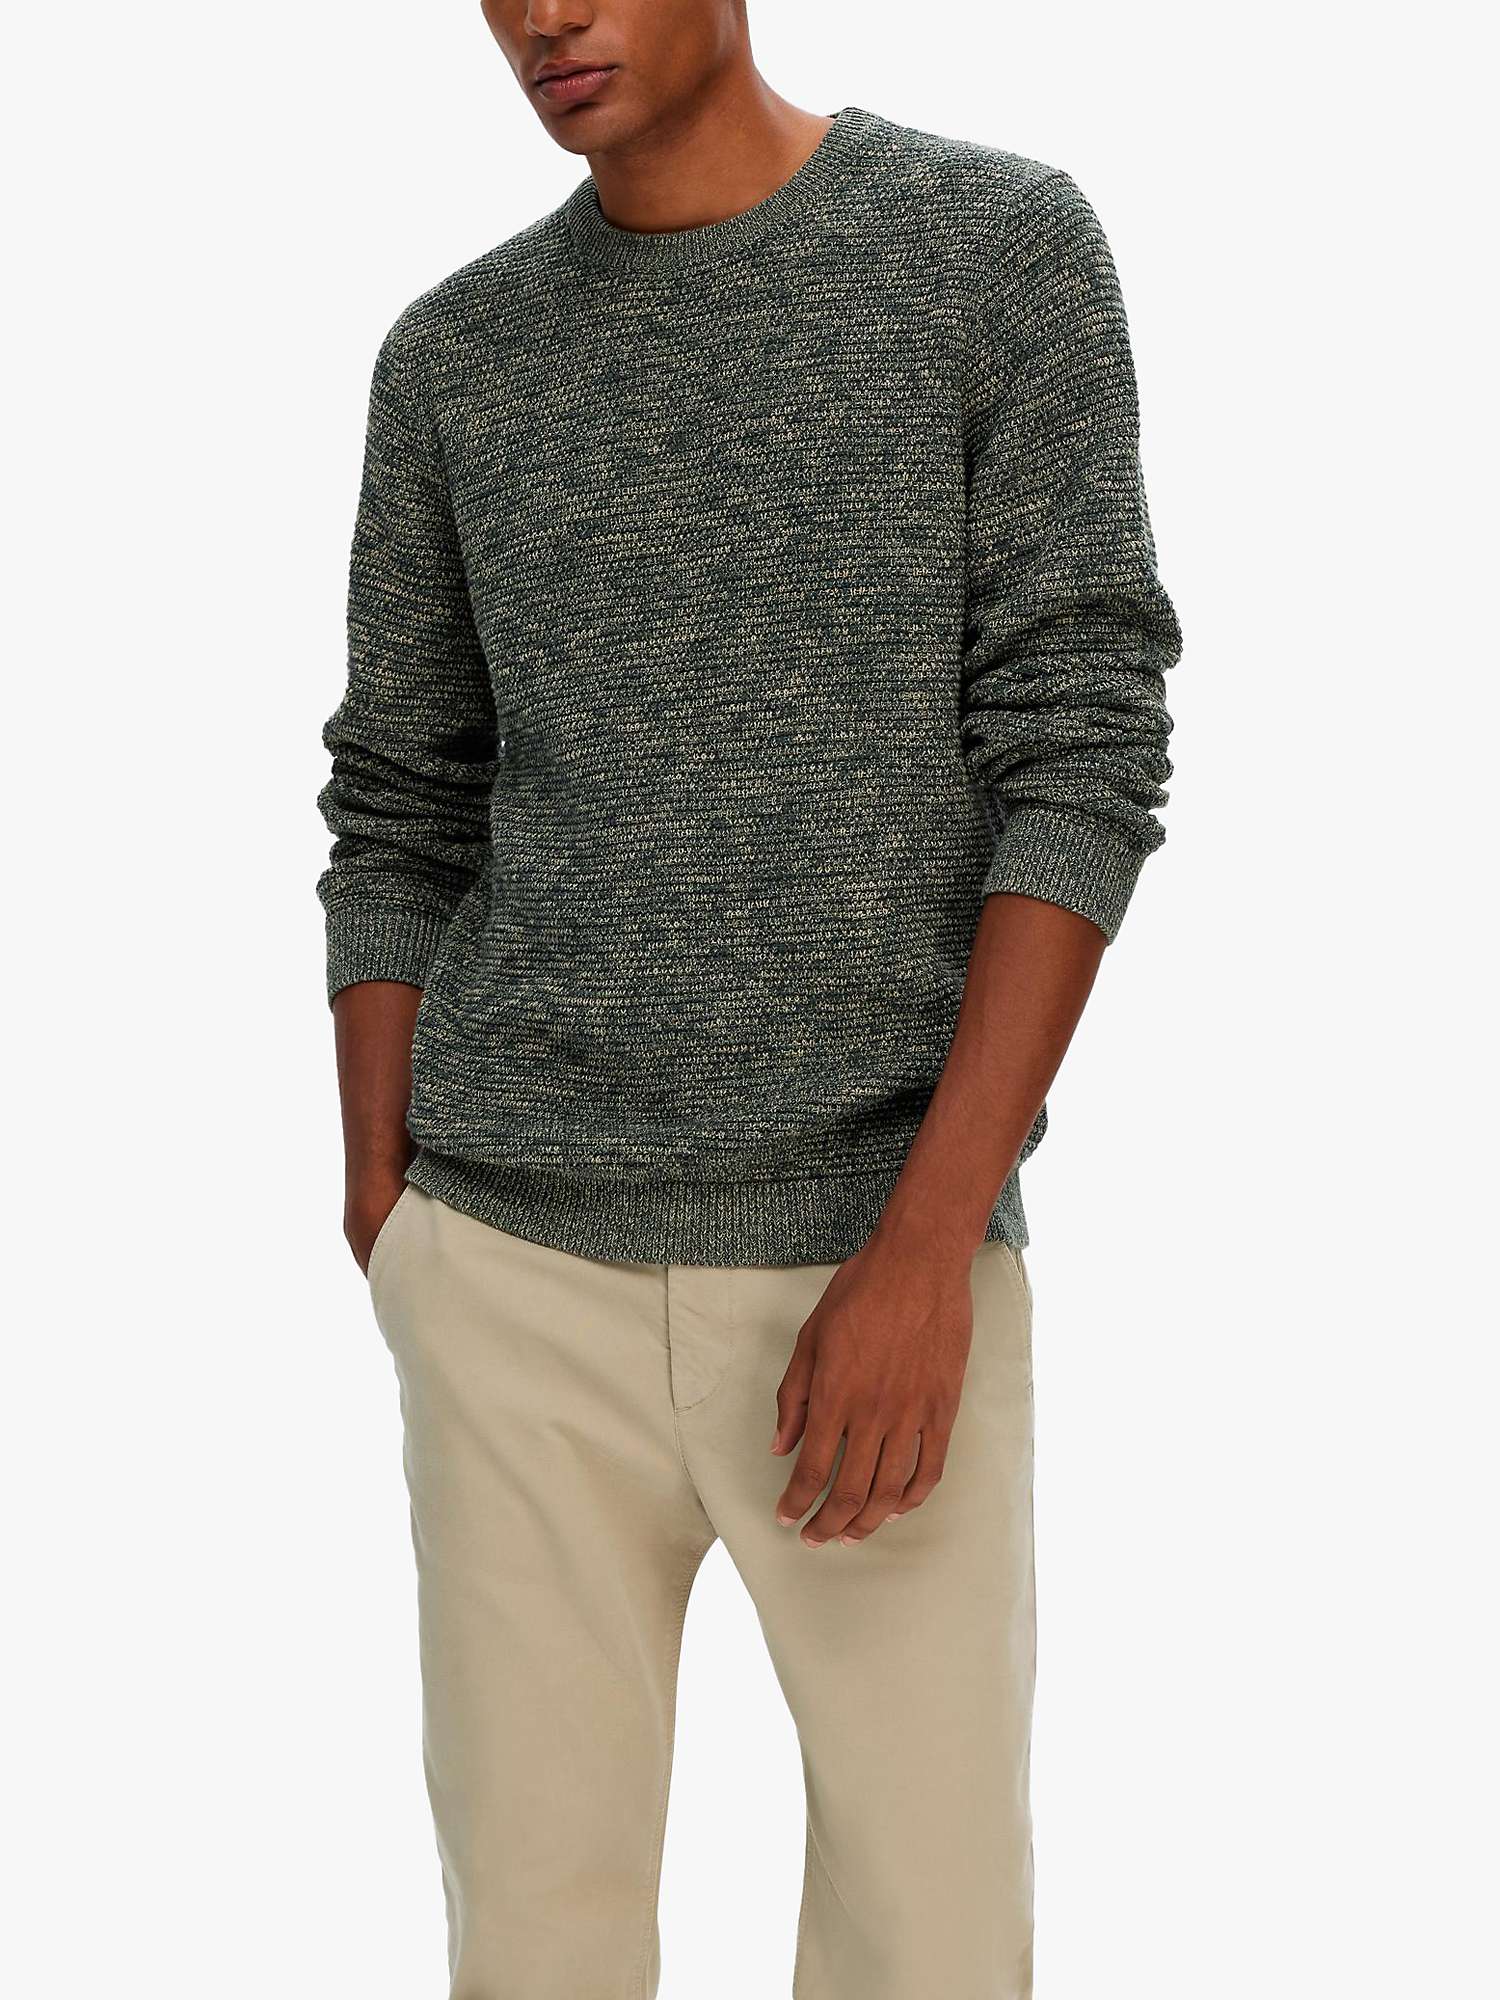 Buy SELECTED HOMME Organic Cotton Bubble Stitch Jumper Online at johnlewis.com